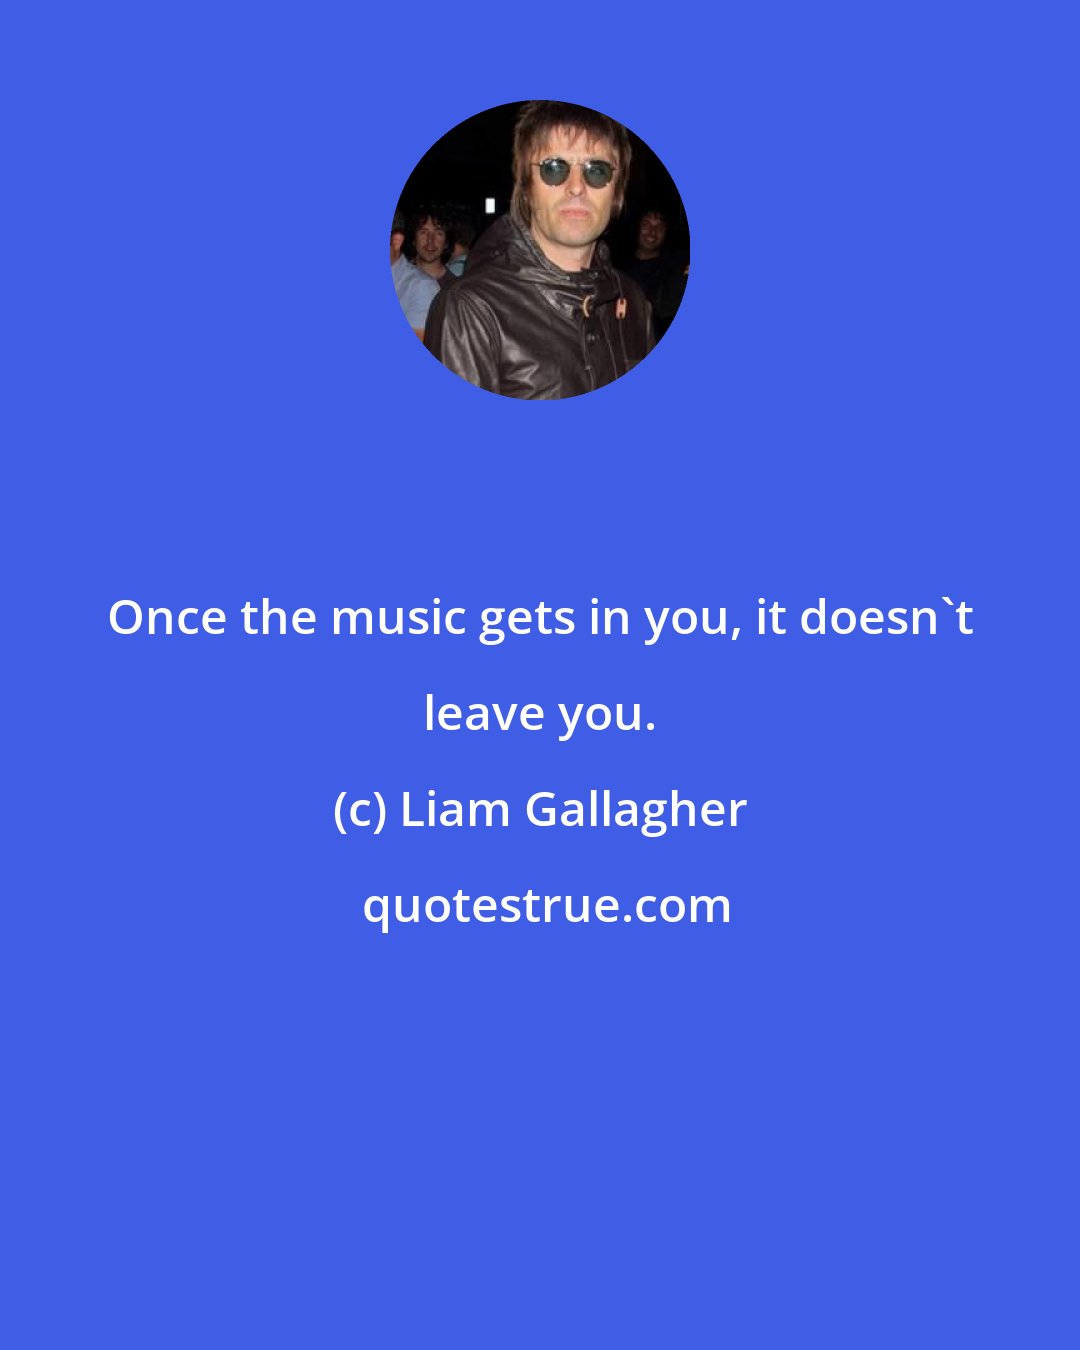 Liam Gallagher: Once the music gets in you, it doesn't leave you.